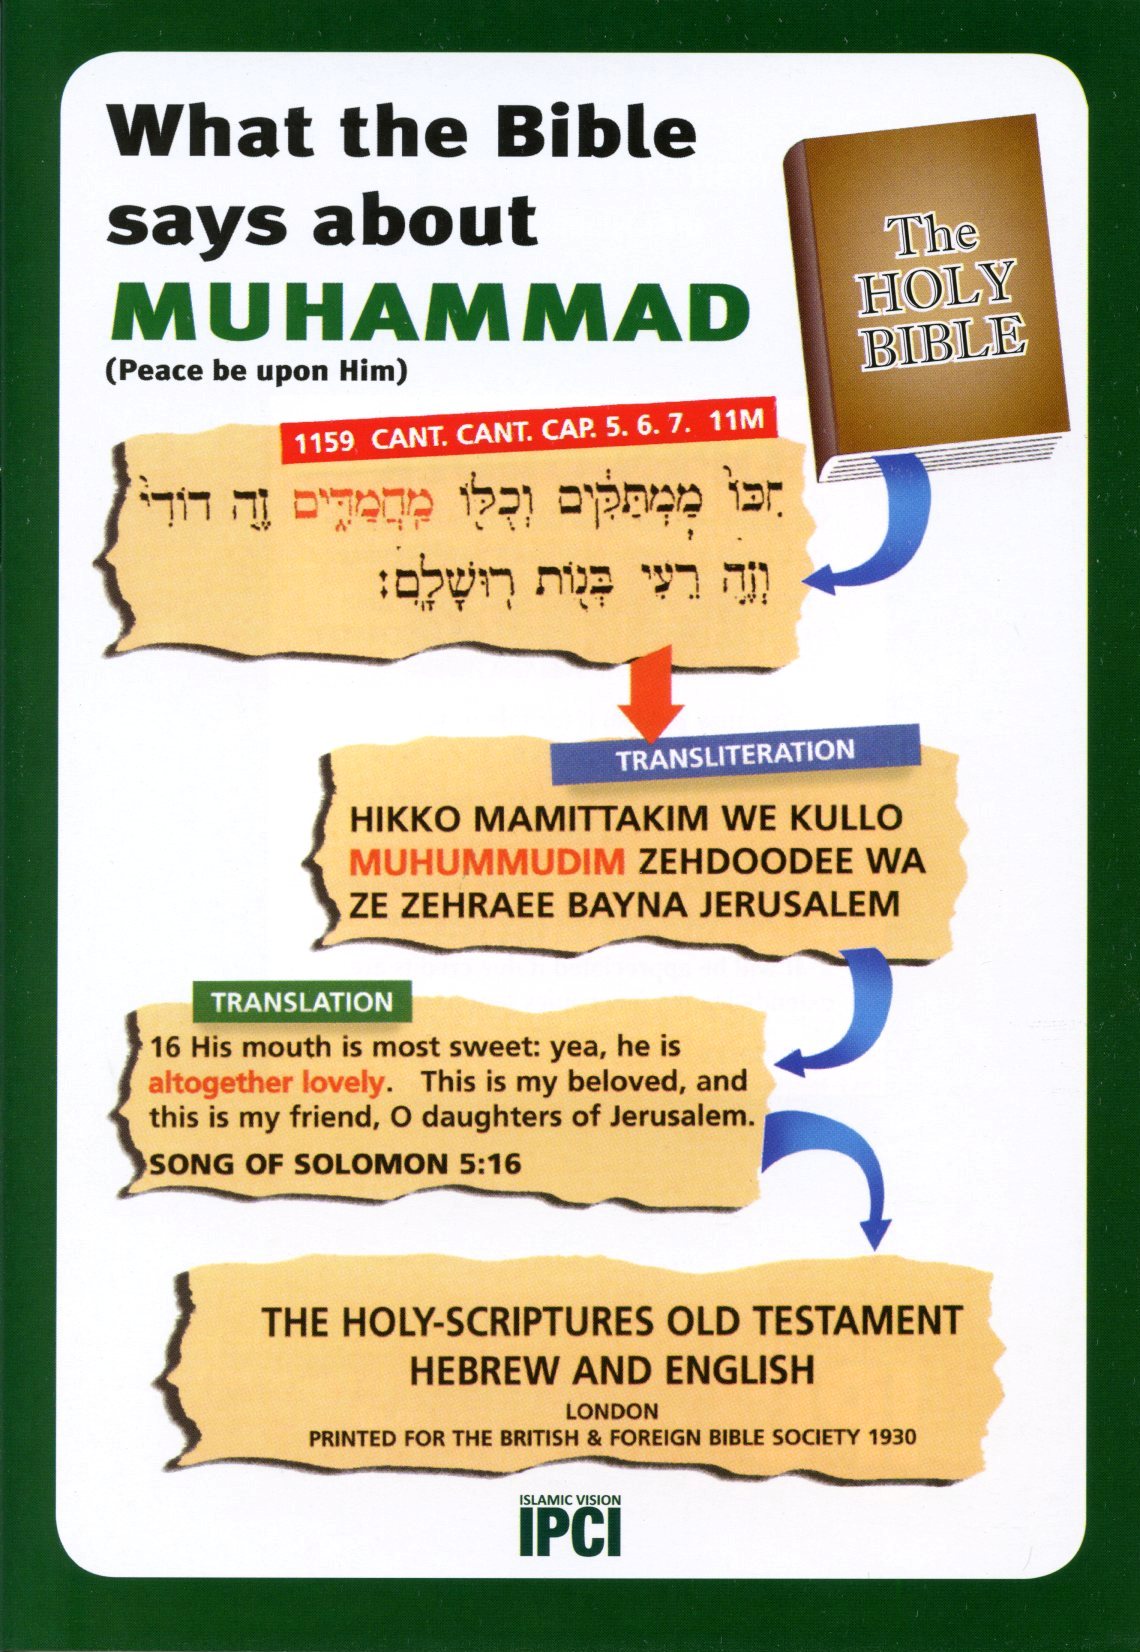 What the Bible says about MUHAMMAD (pbuh)